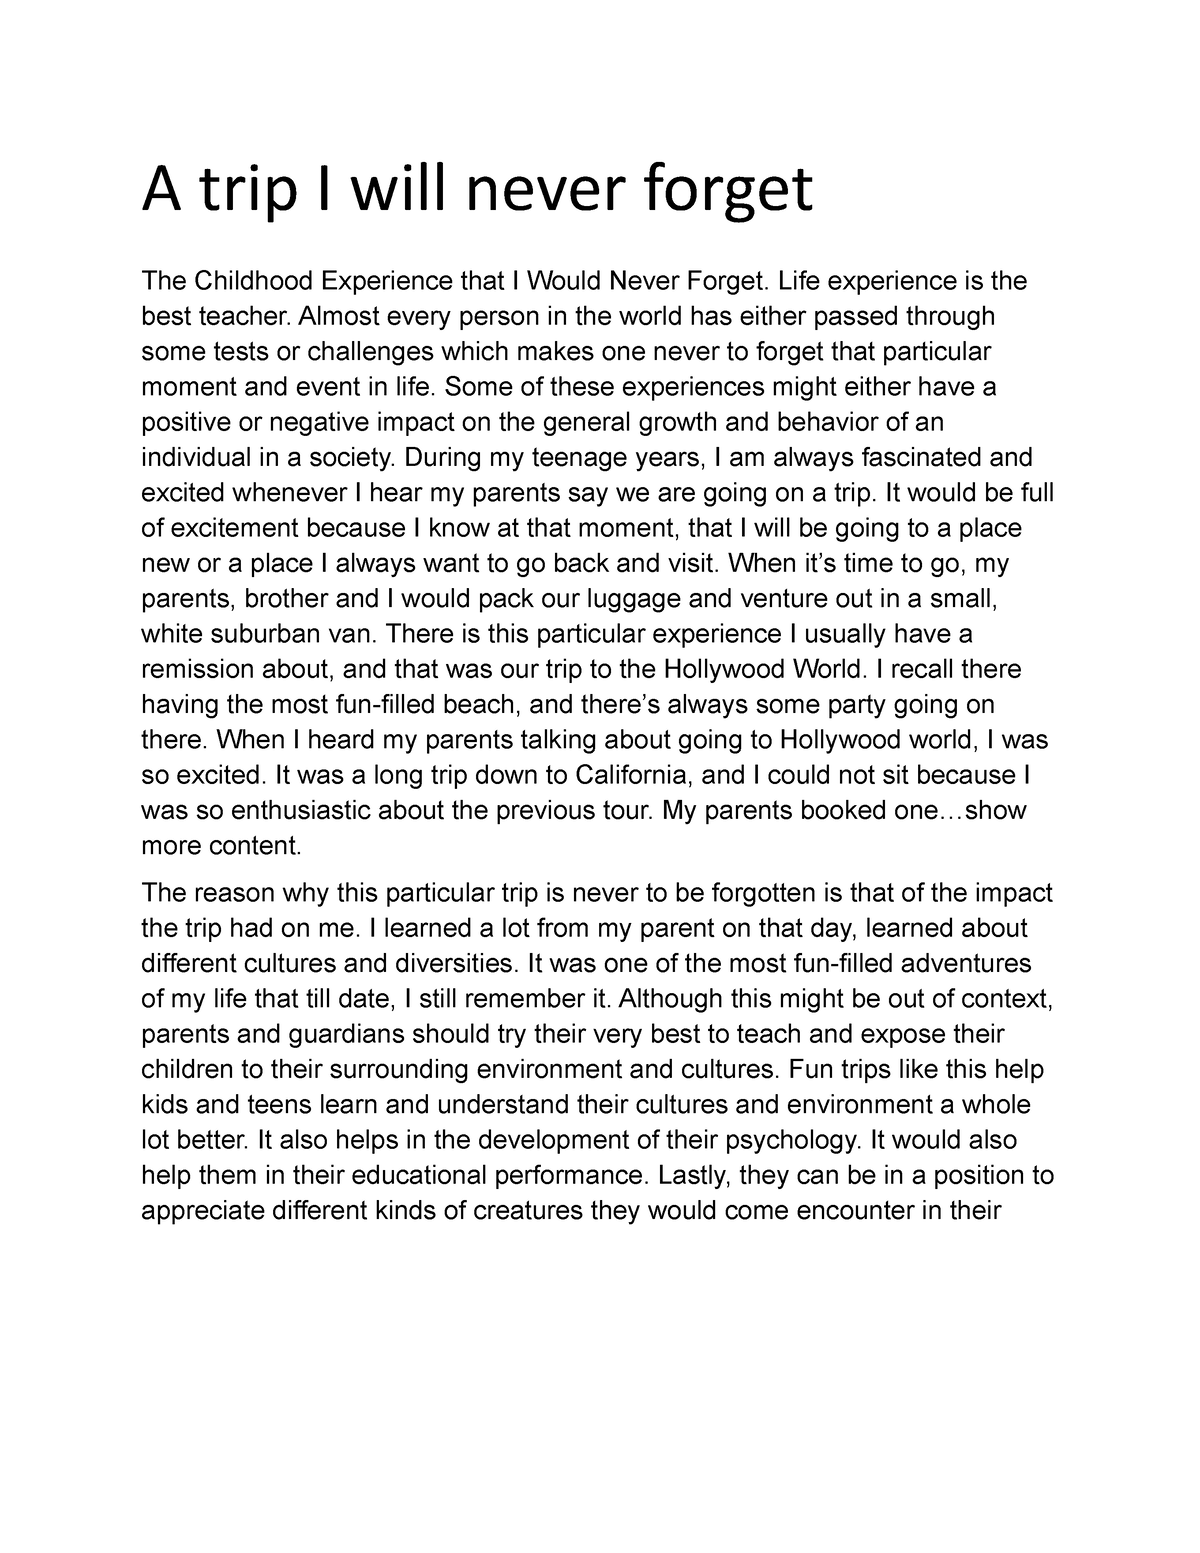 english essay about the day i will never forget